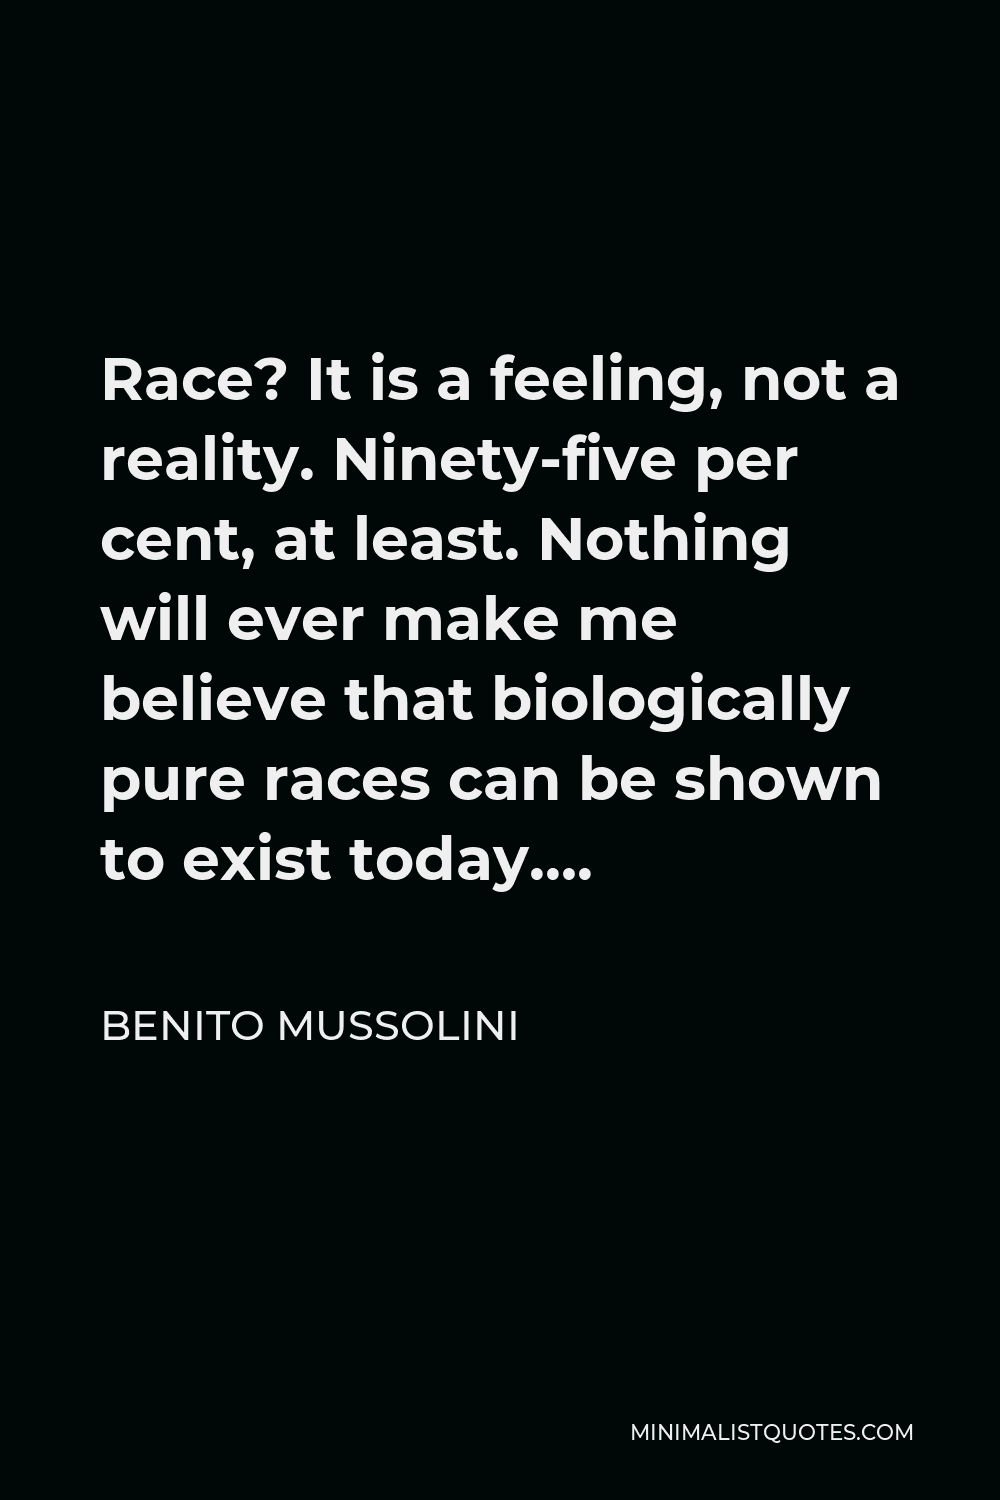 Benito Mussolini Quote - Race? It is a feeling, not a reality. Ninety-five per cent, at least. Nothing will ever make me believe that biologically pure races can be shown to exist today….